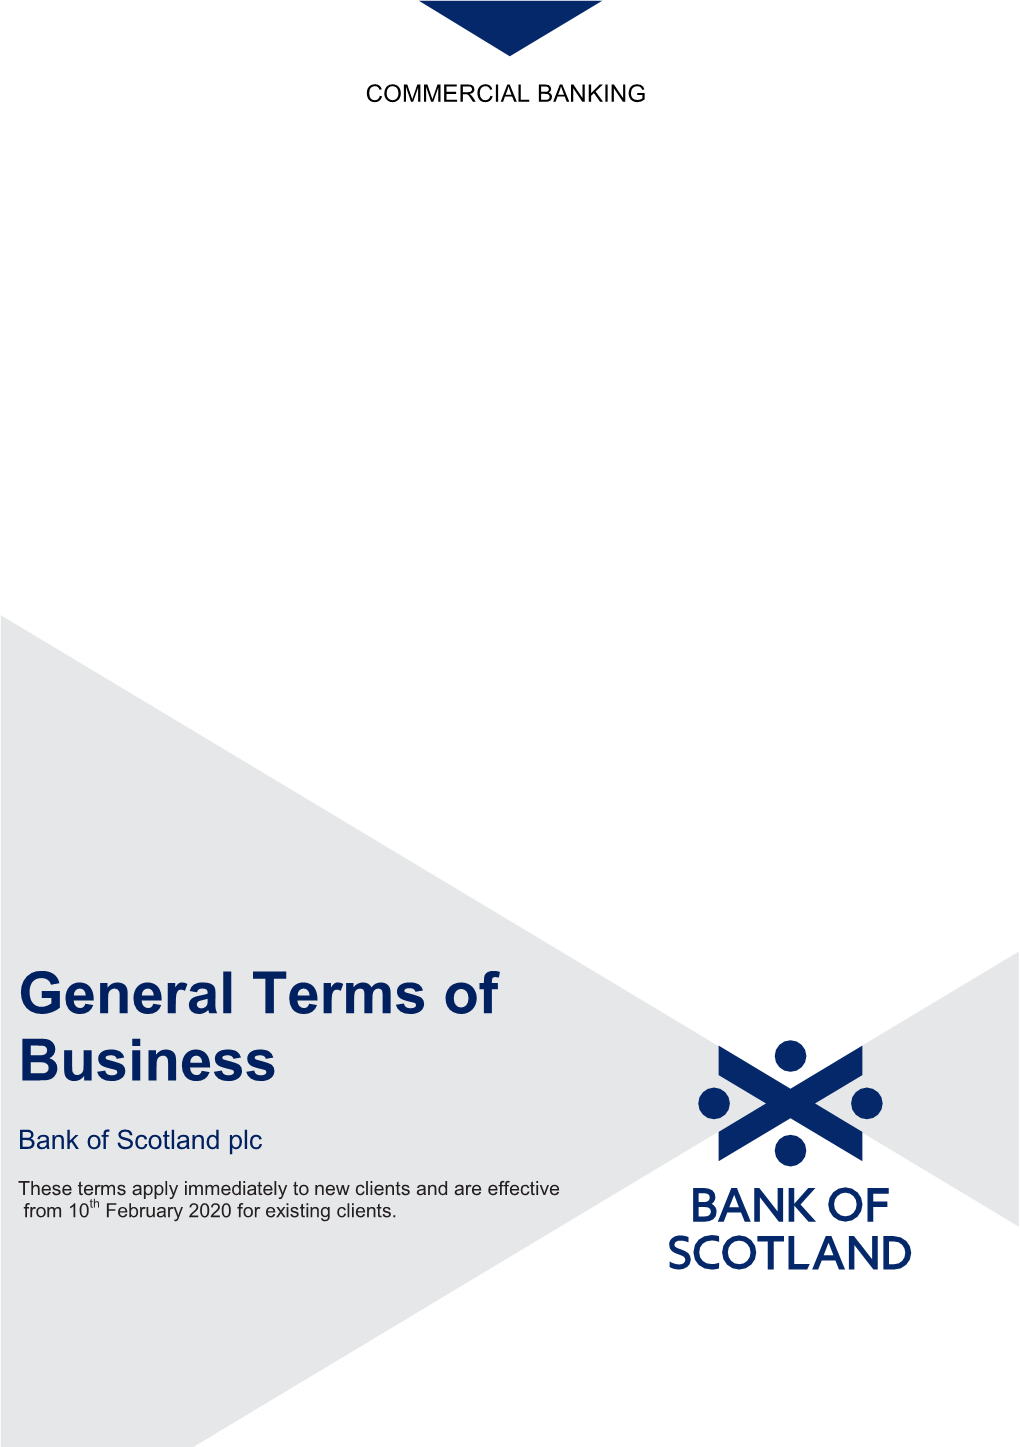 General Terms of Business